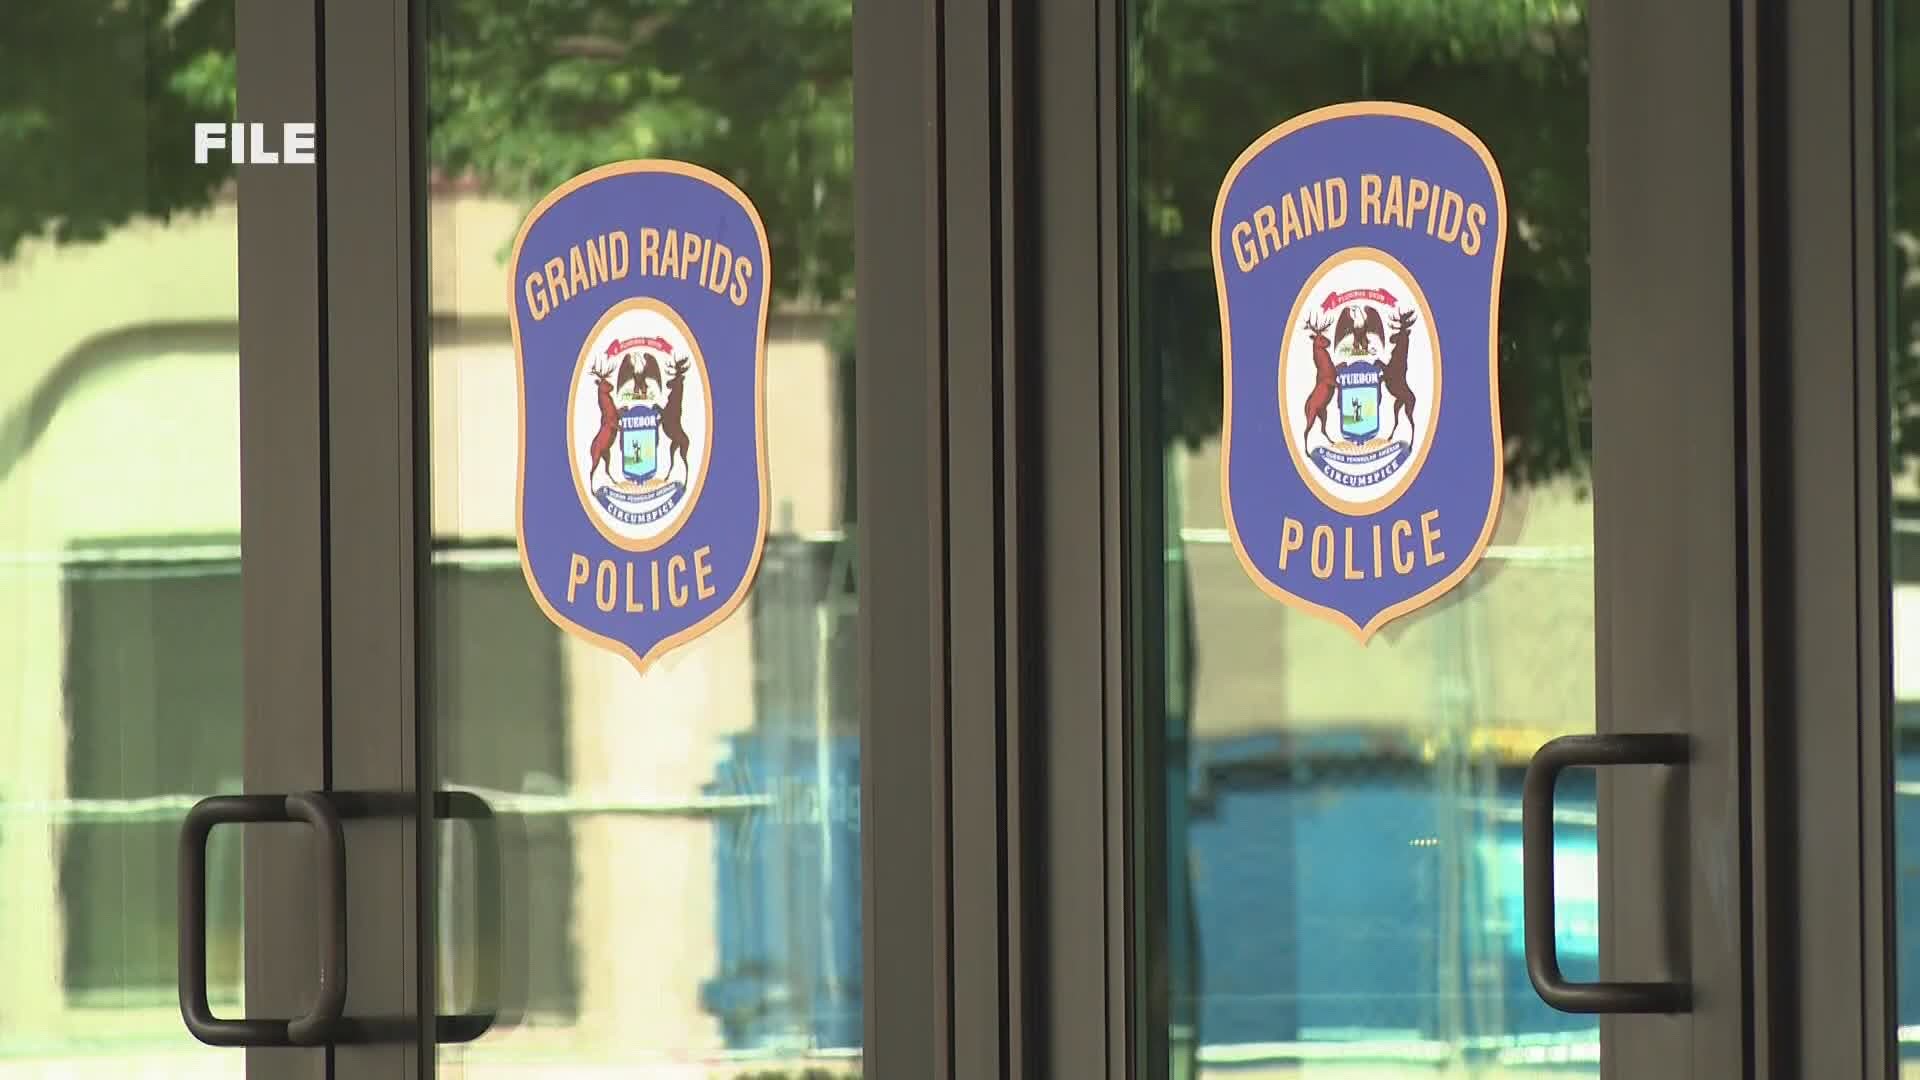 City commissioners approved a proposal to create three civilian positions within the GRPD, which would reallocate about $400,000 of the budget.